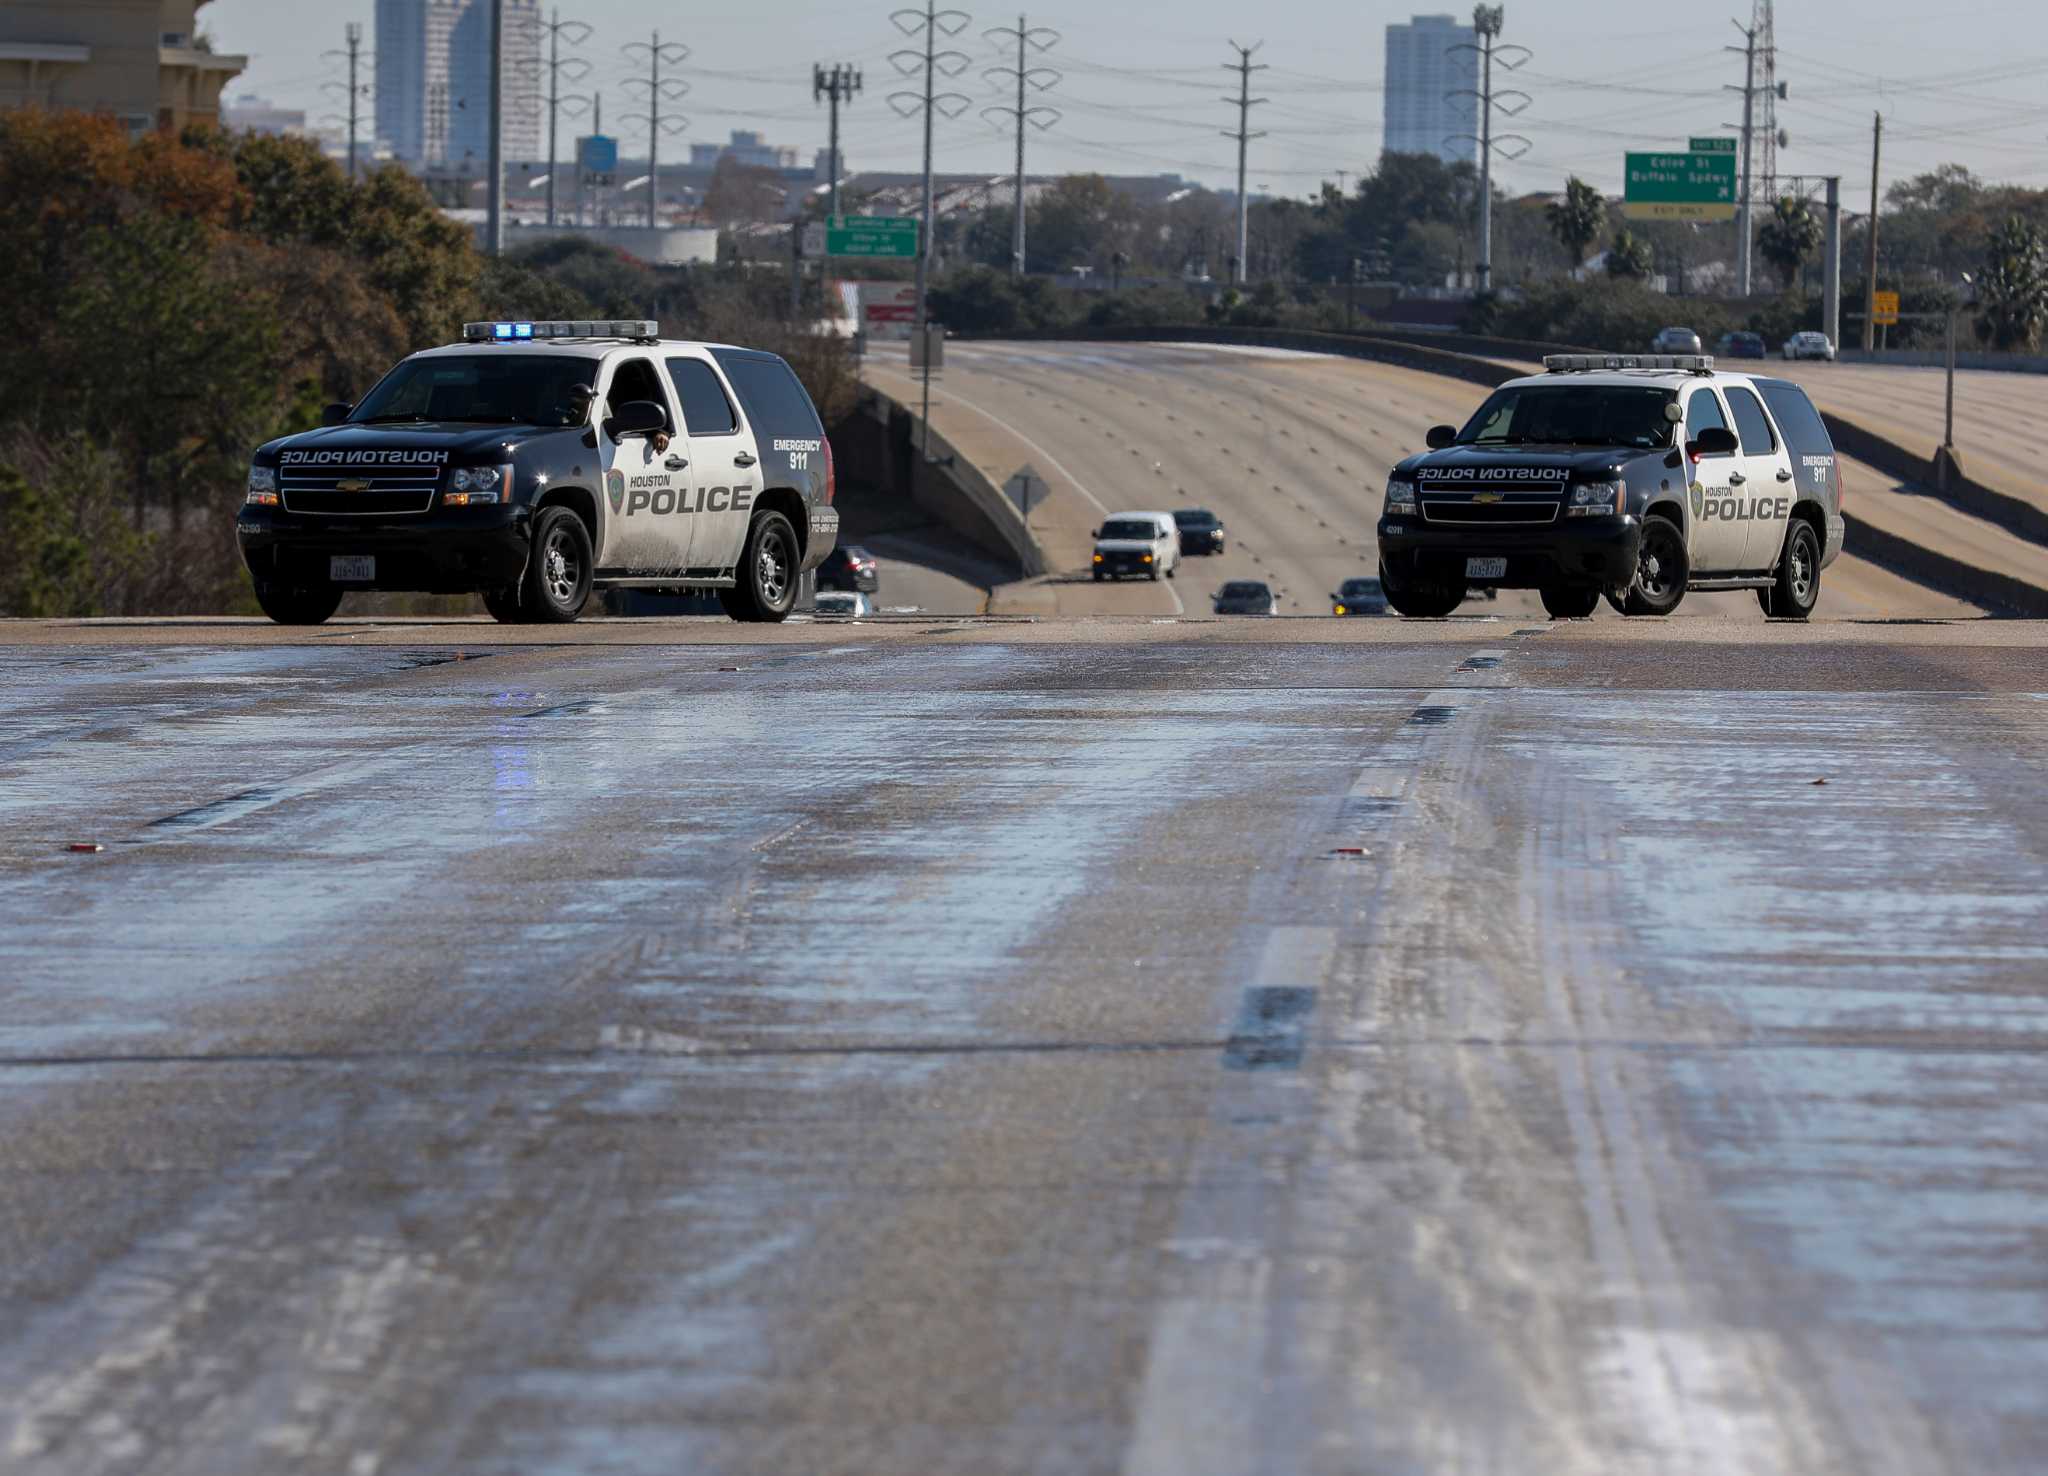 As ice storm fades, Houston region tallies cost in lives, dollars, time